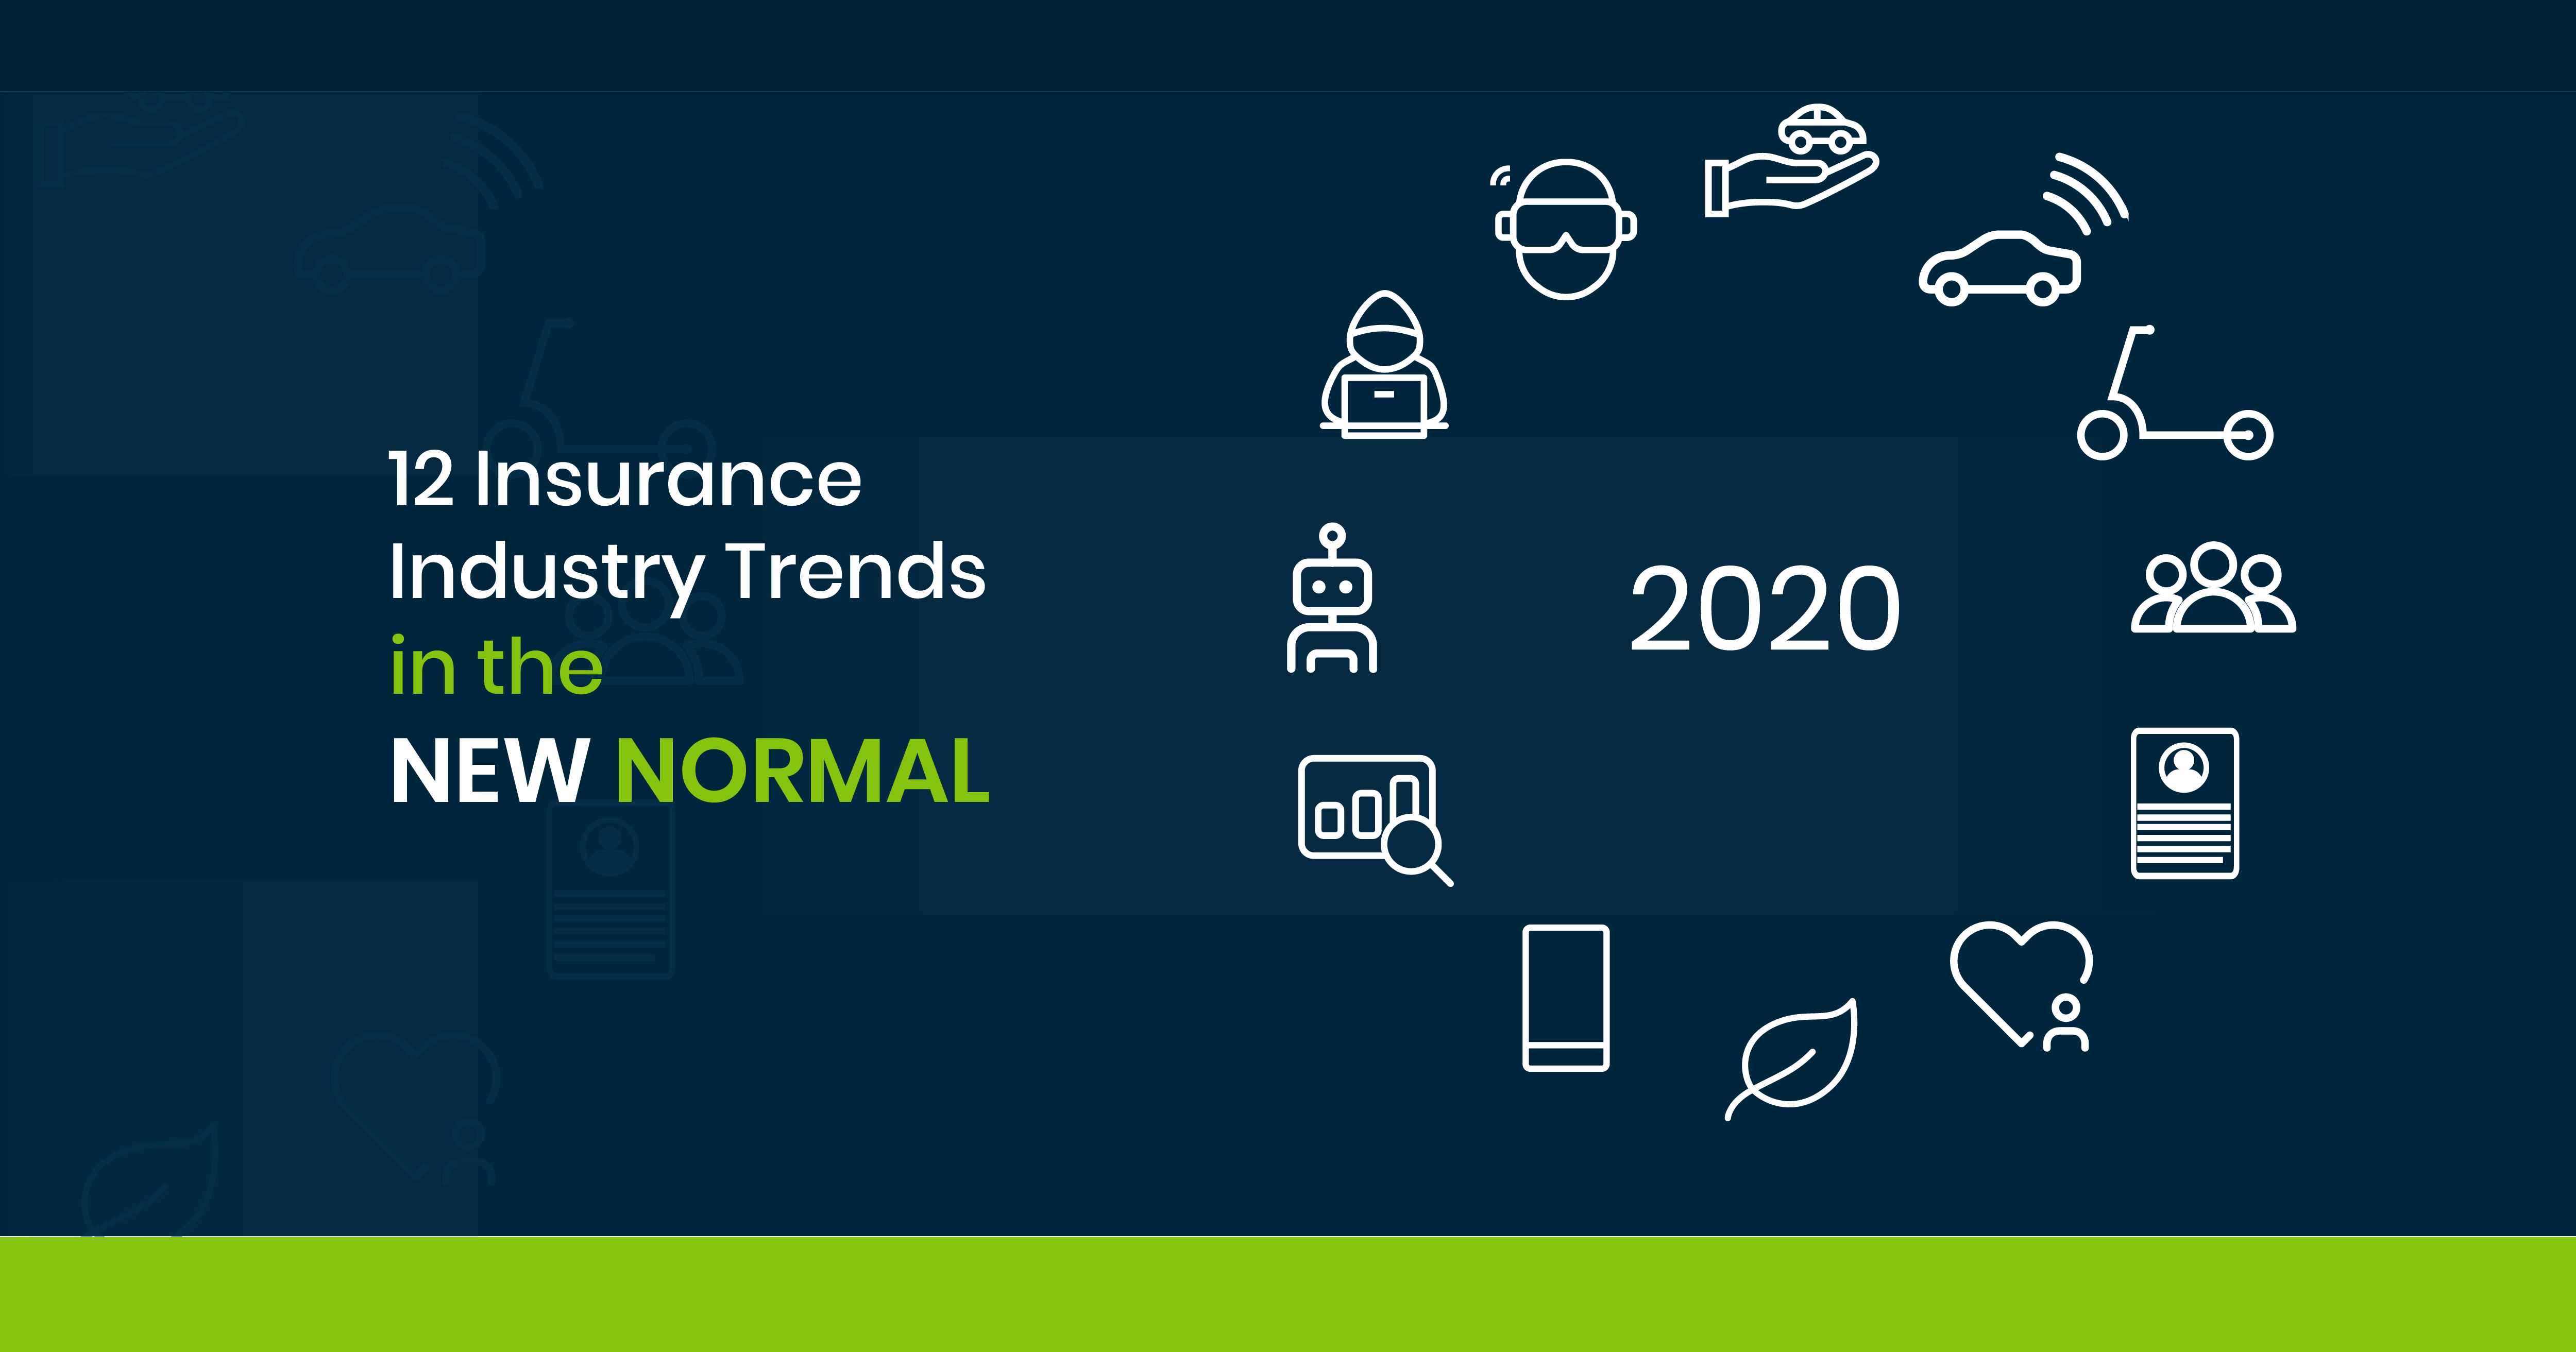 Insurance Industry: 12 Trends for 2020 in the New Normal (Op-Ed) Illustration